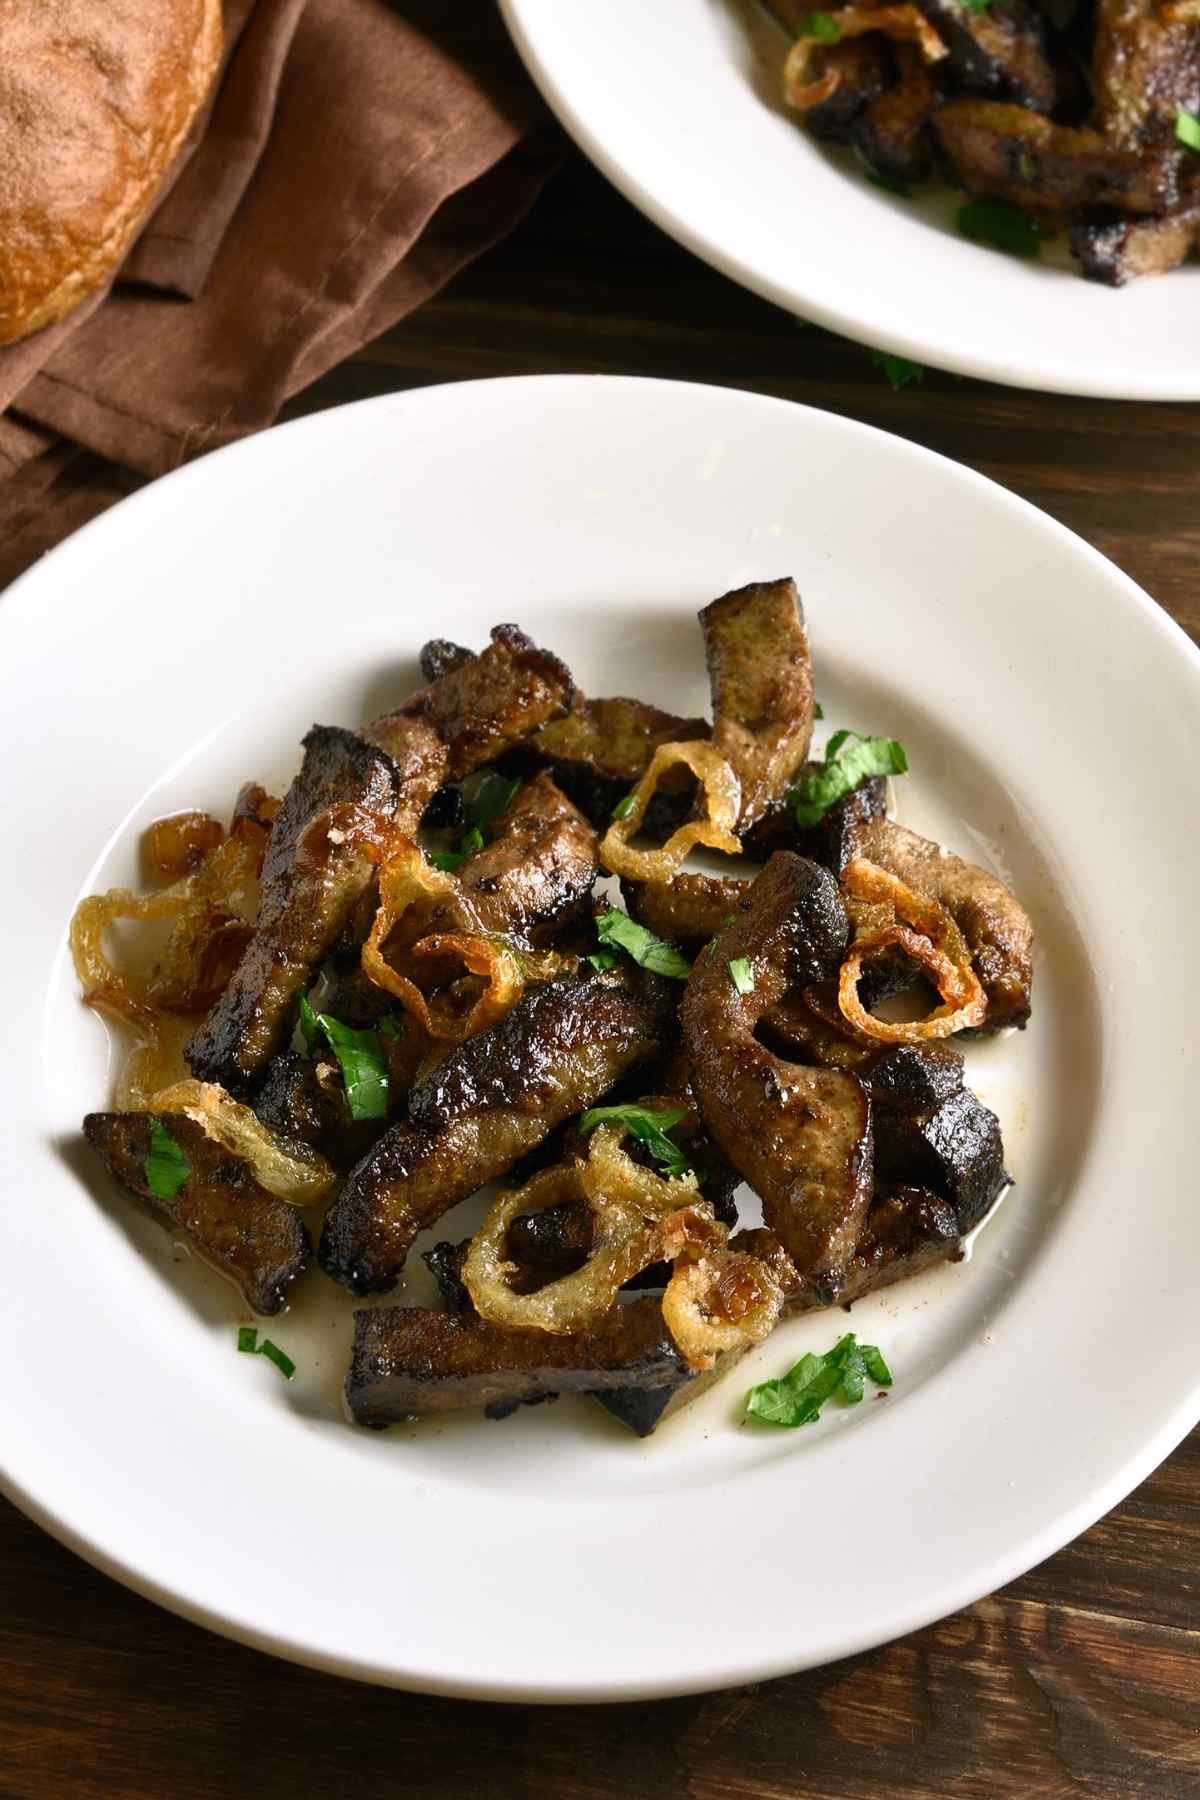 If you enjoy beef liver, add this recipe to your collection. It takes just 30 minutes to make and the liver is perfectly seasoned.